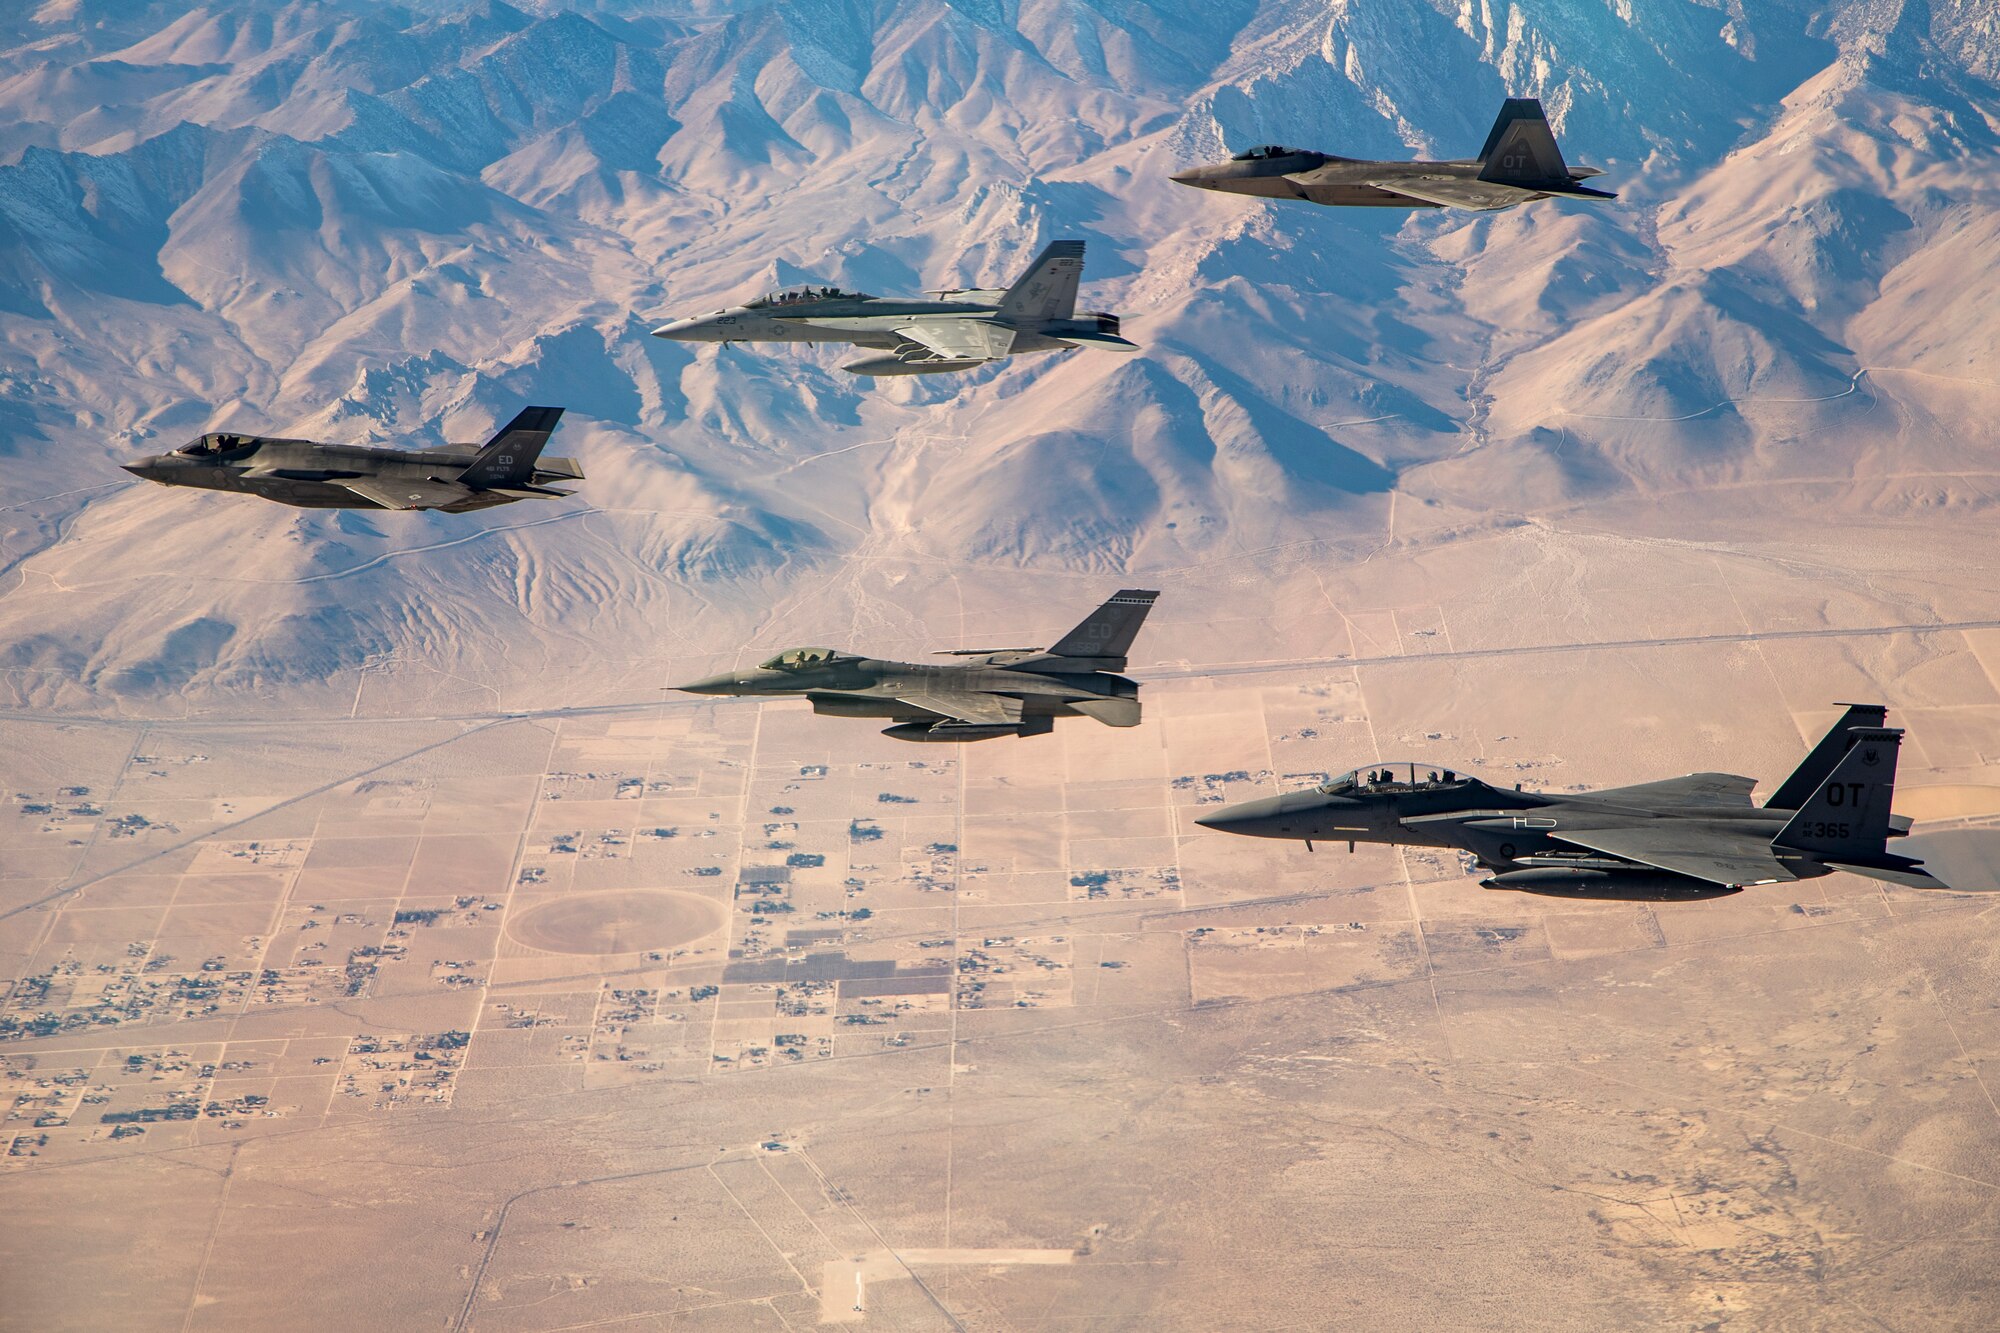 An F-35 and F-16 from Edwards Air Force Base are joined by an F-15E and F-22 from the 422nd Test and Evaluation Squadron out of Nellis Air Force Base, Nevada, along with a Navy F-18 from Air Test and Evaluation Squadron 31 out of Naval Air Weapons Station China Lake, California, Dec. 13, 2017, for an Orange Flag test exercise. (U.S. Air Force photo by Ethan Wagner)